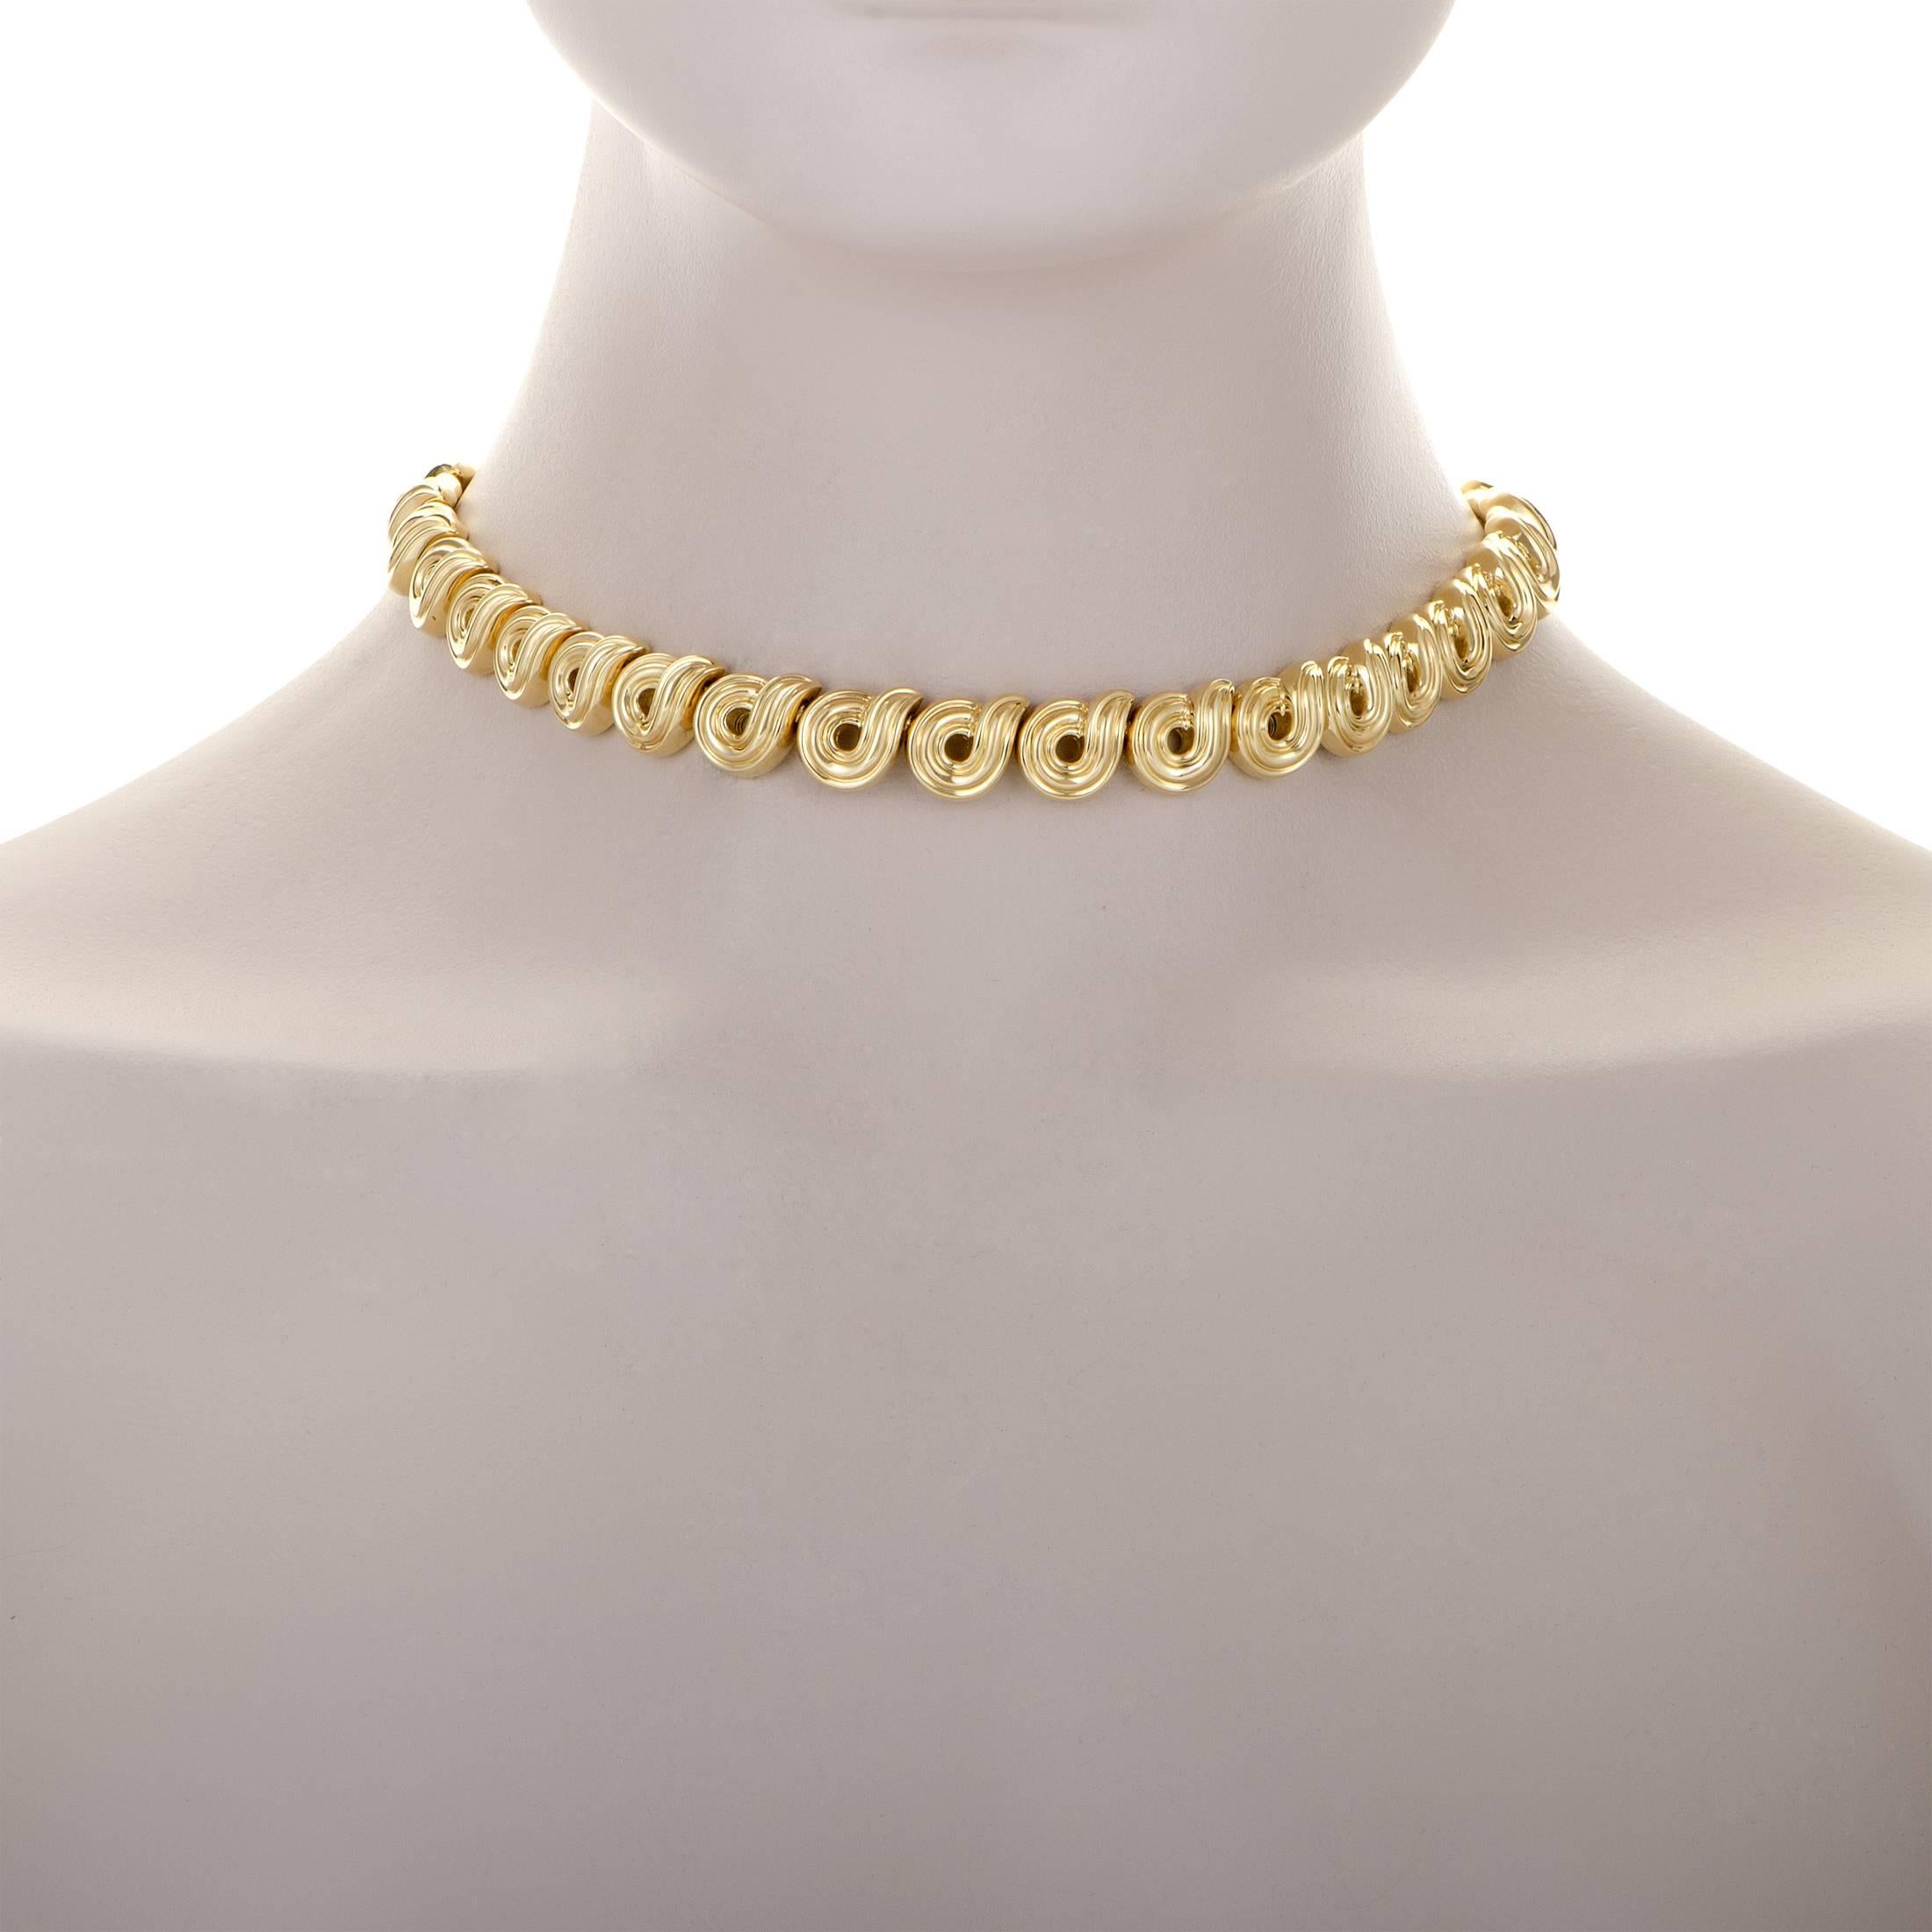 Marvelously designed links made of immaculately polished and luxuriously radiant 18K yellow gold produce an intriguing pattern and mesmerizing allure in this fabulous necklace from Boucheron that exudes refined style and compelling glimmer.